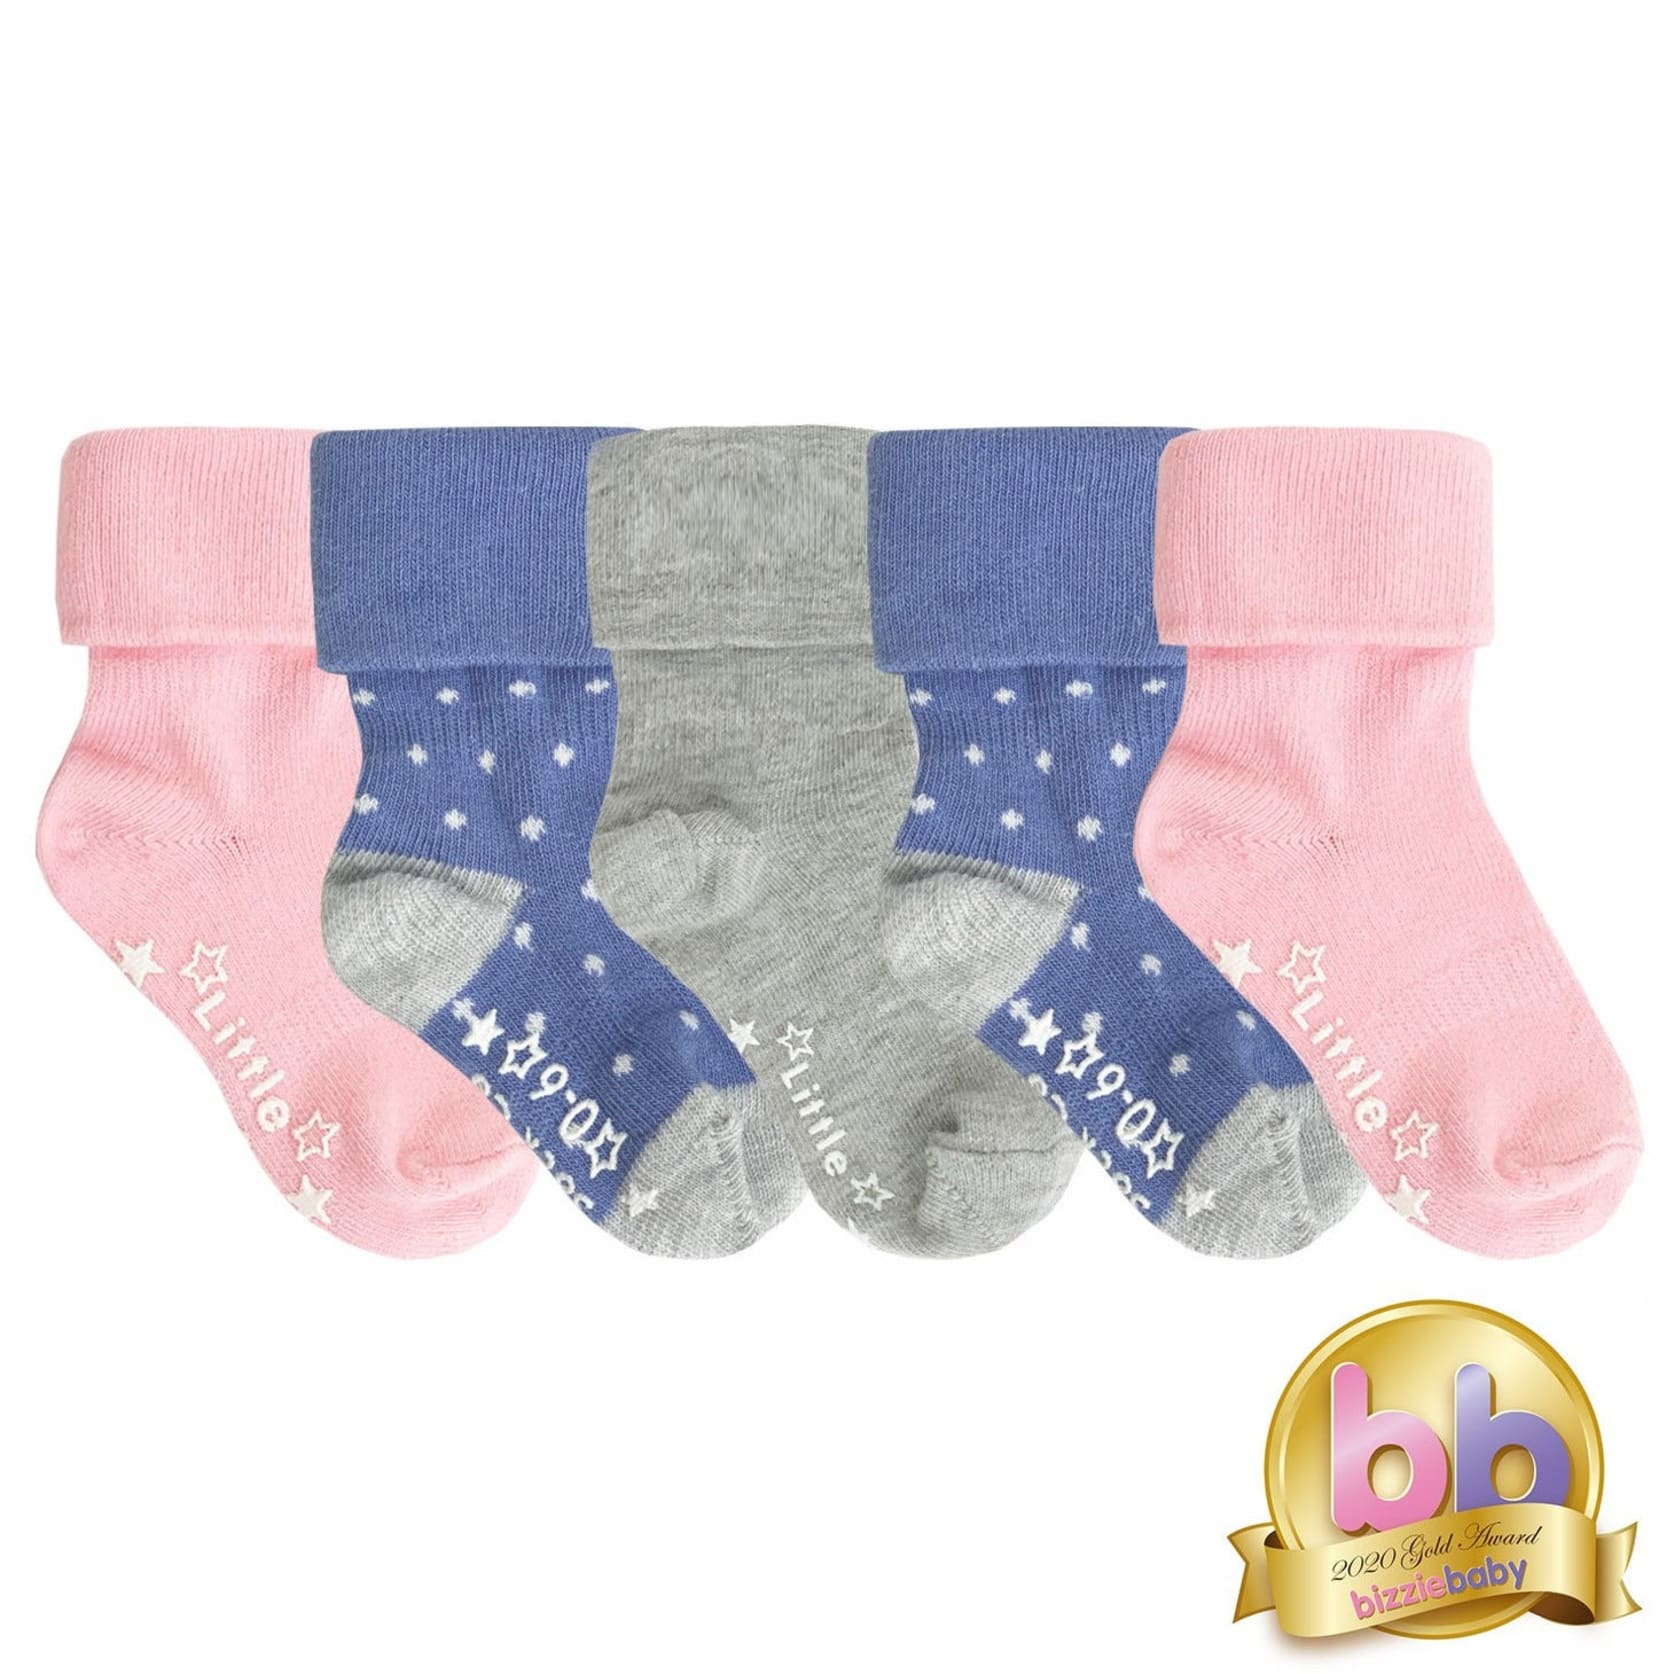 Non-Slip Stay on Baby and Toddler Socks - 5 Pack in Fairy Tale Pink, Cornflower Pin Dot and Grey Sky